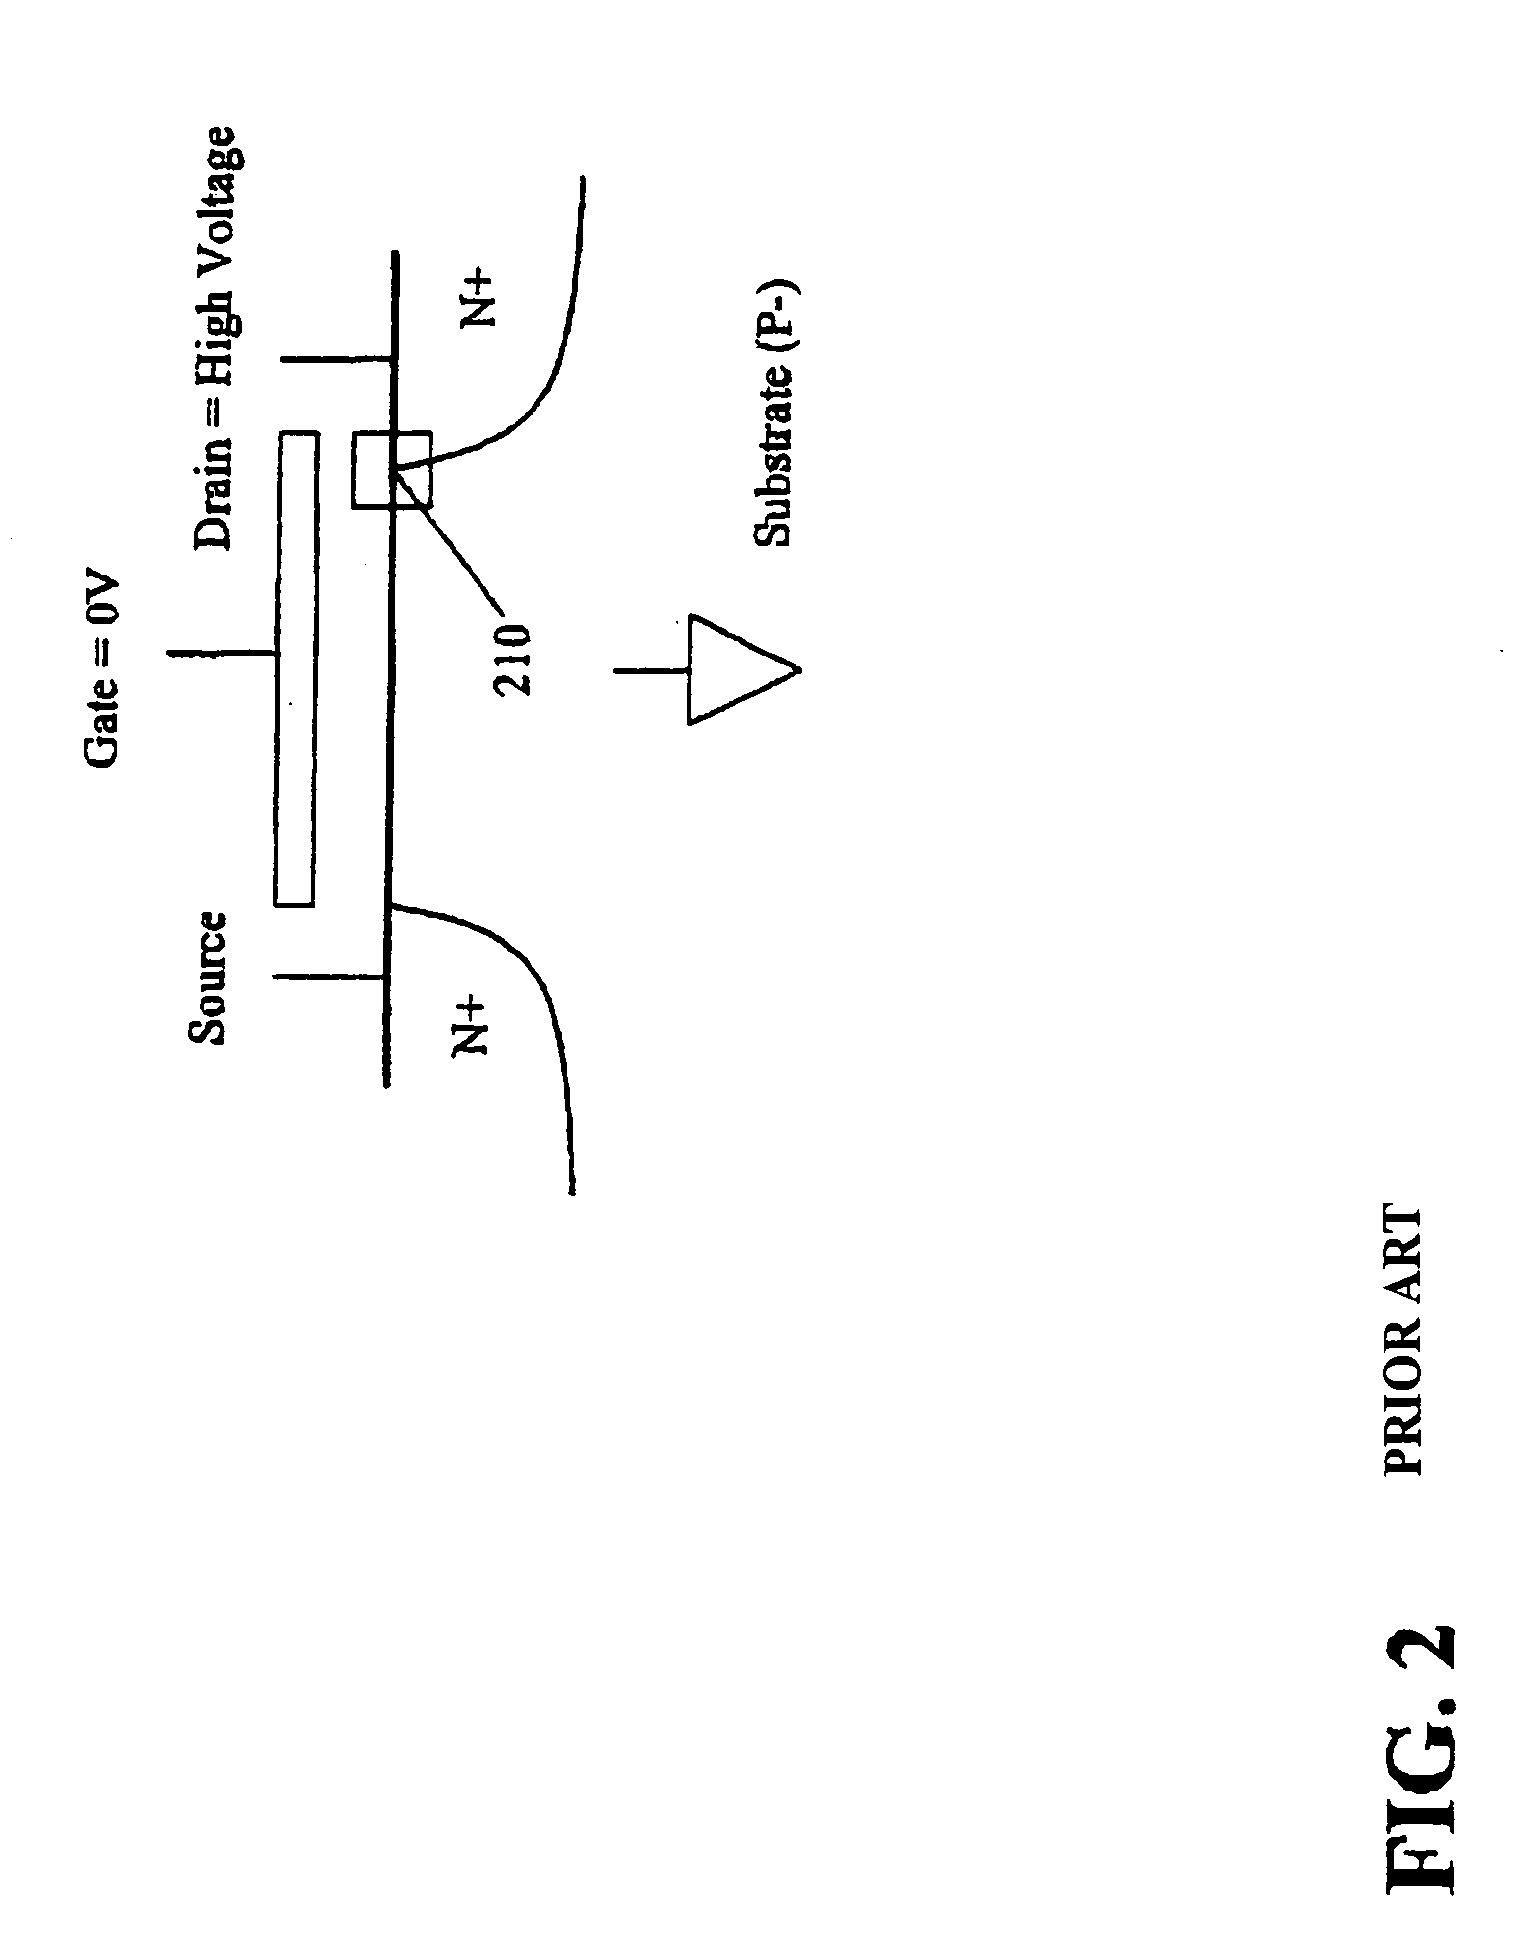 Method and apparatus for avoiding gated diode breakdown in transistor circuits